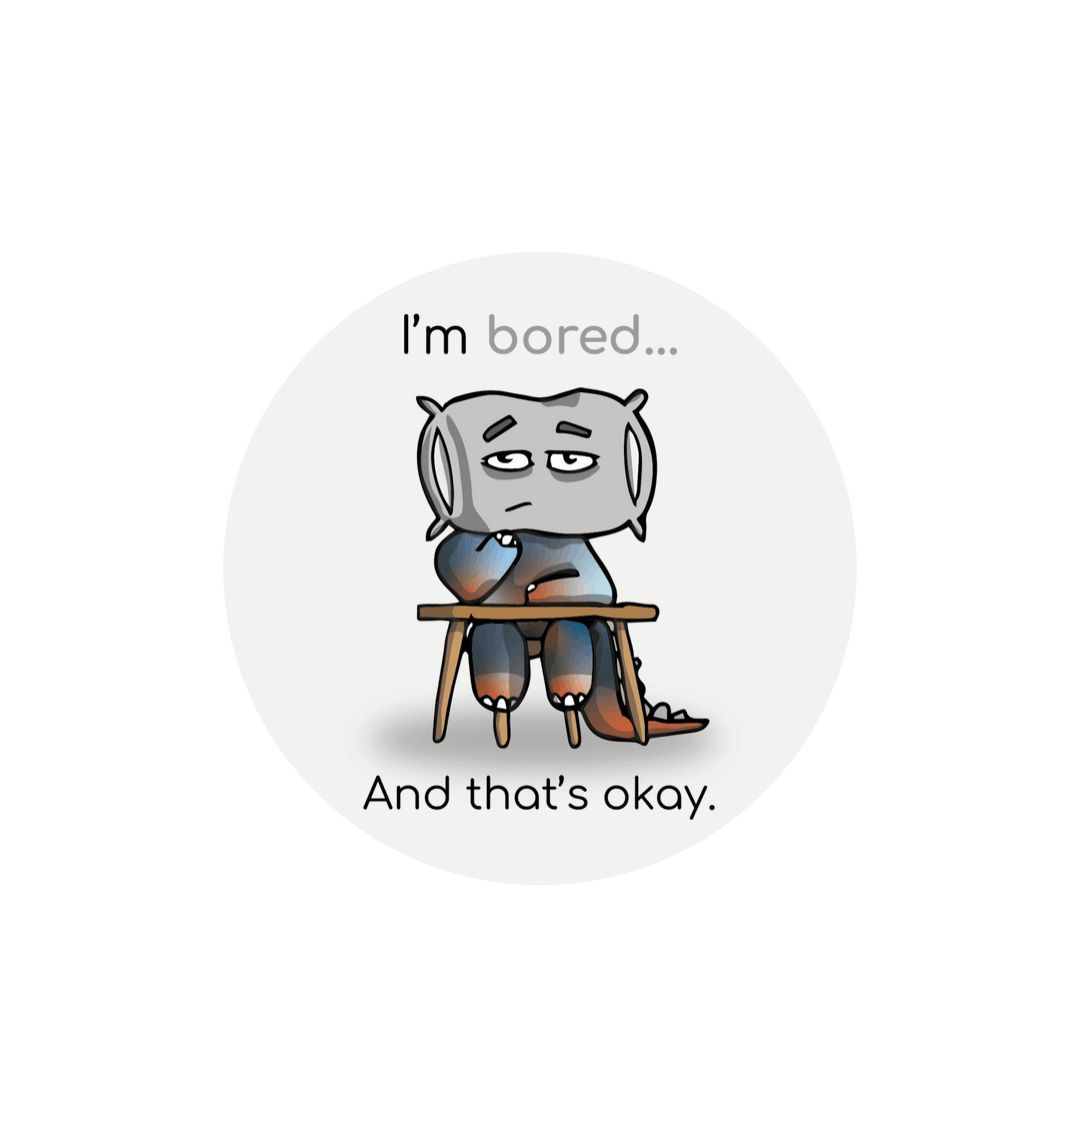 White \\\"I'm bored... And that's okay!\\\" Round Children's Emotions Sticker 60mm x 60mm